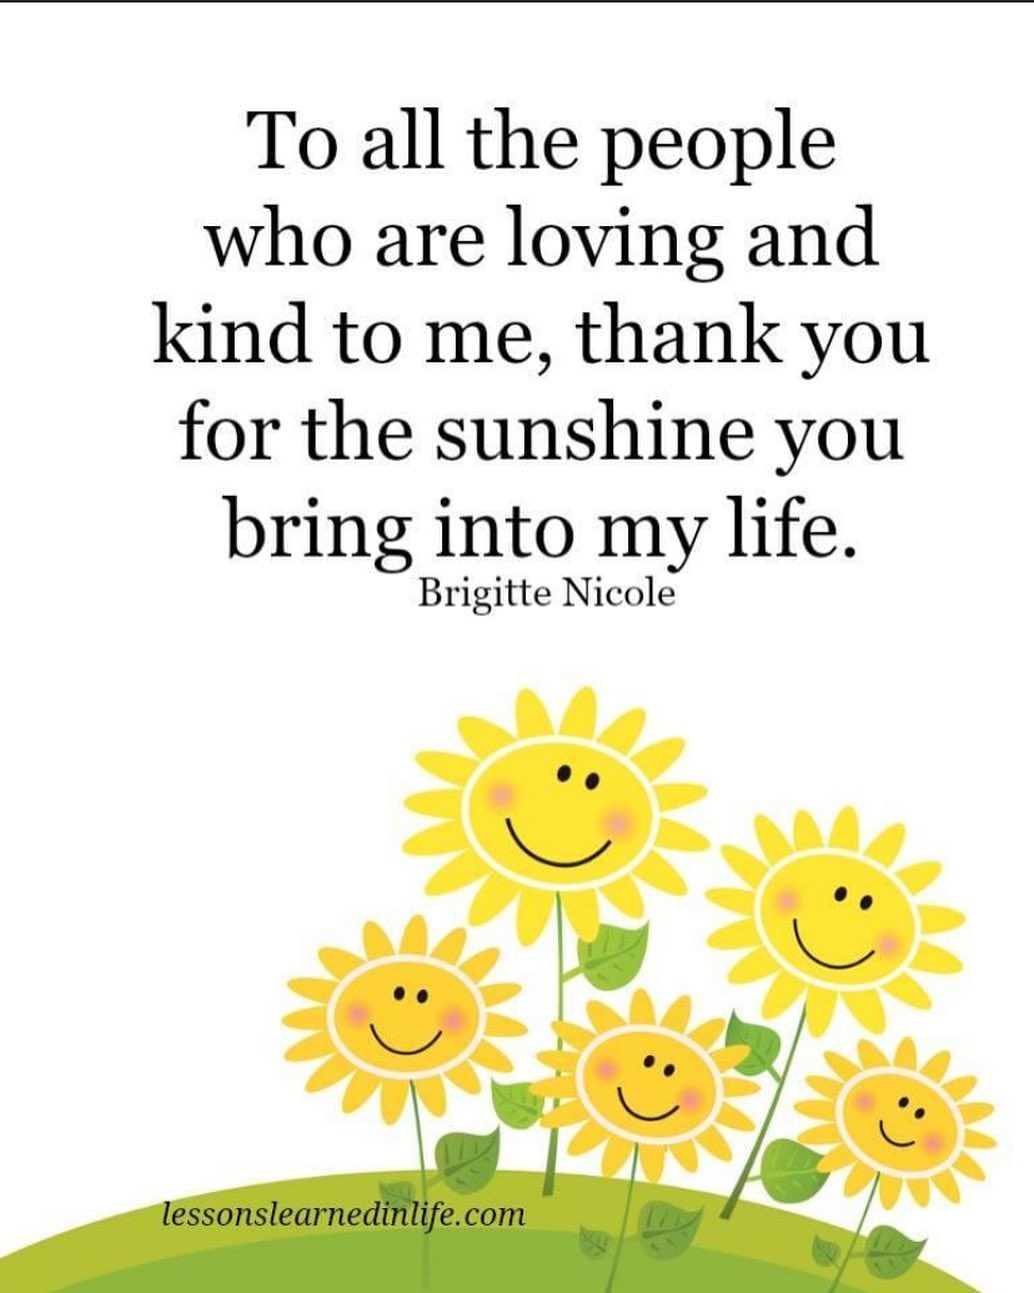 To all the people who are loving and kind to me, thank you for the sunshine you bring into my life.